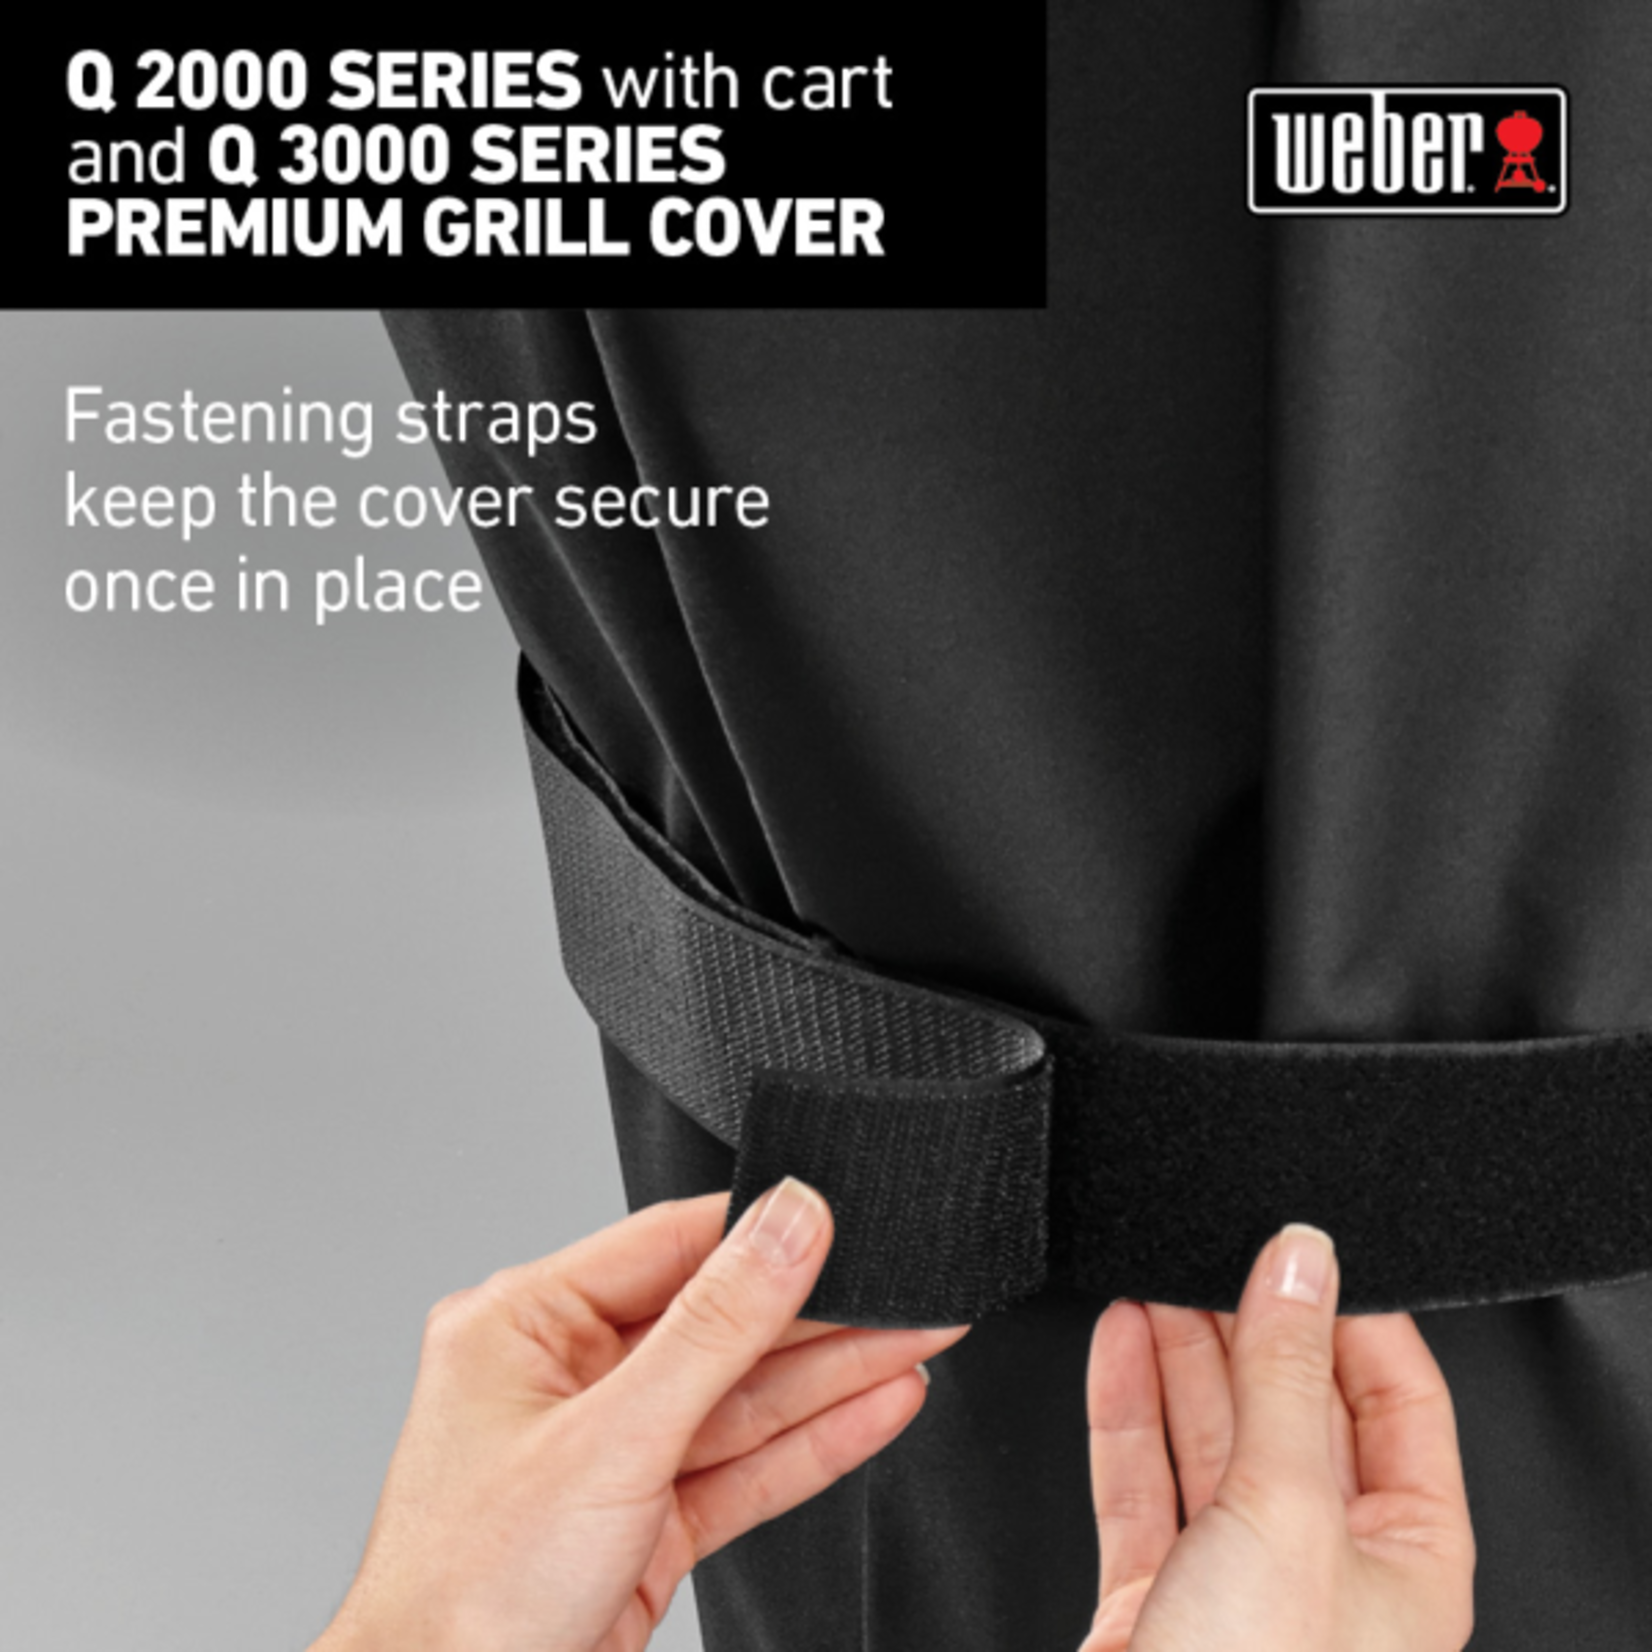 Weber Premium Grill Cover - Fits Q 2000 series grills with Q cart and 3000 series